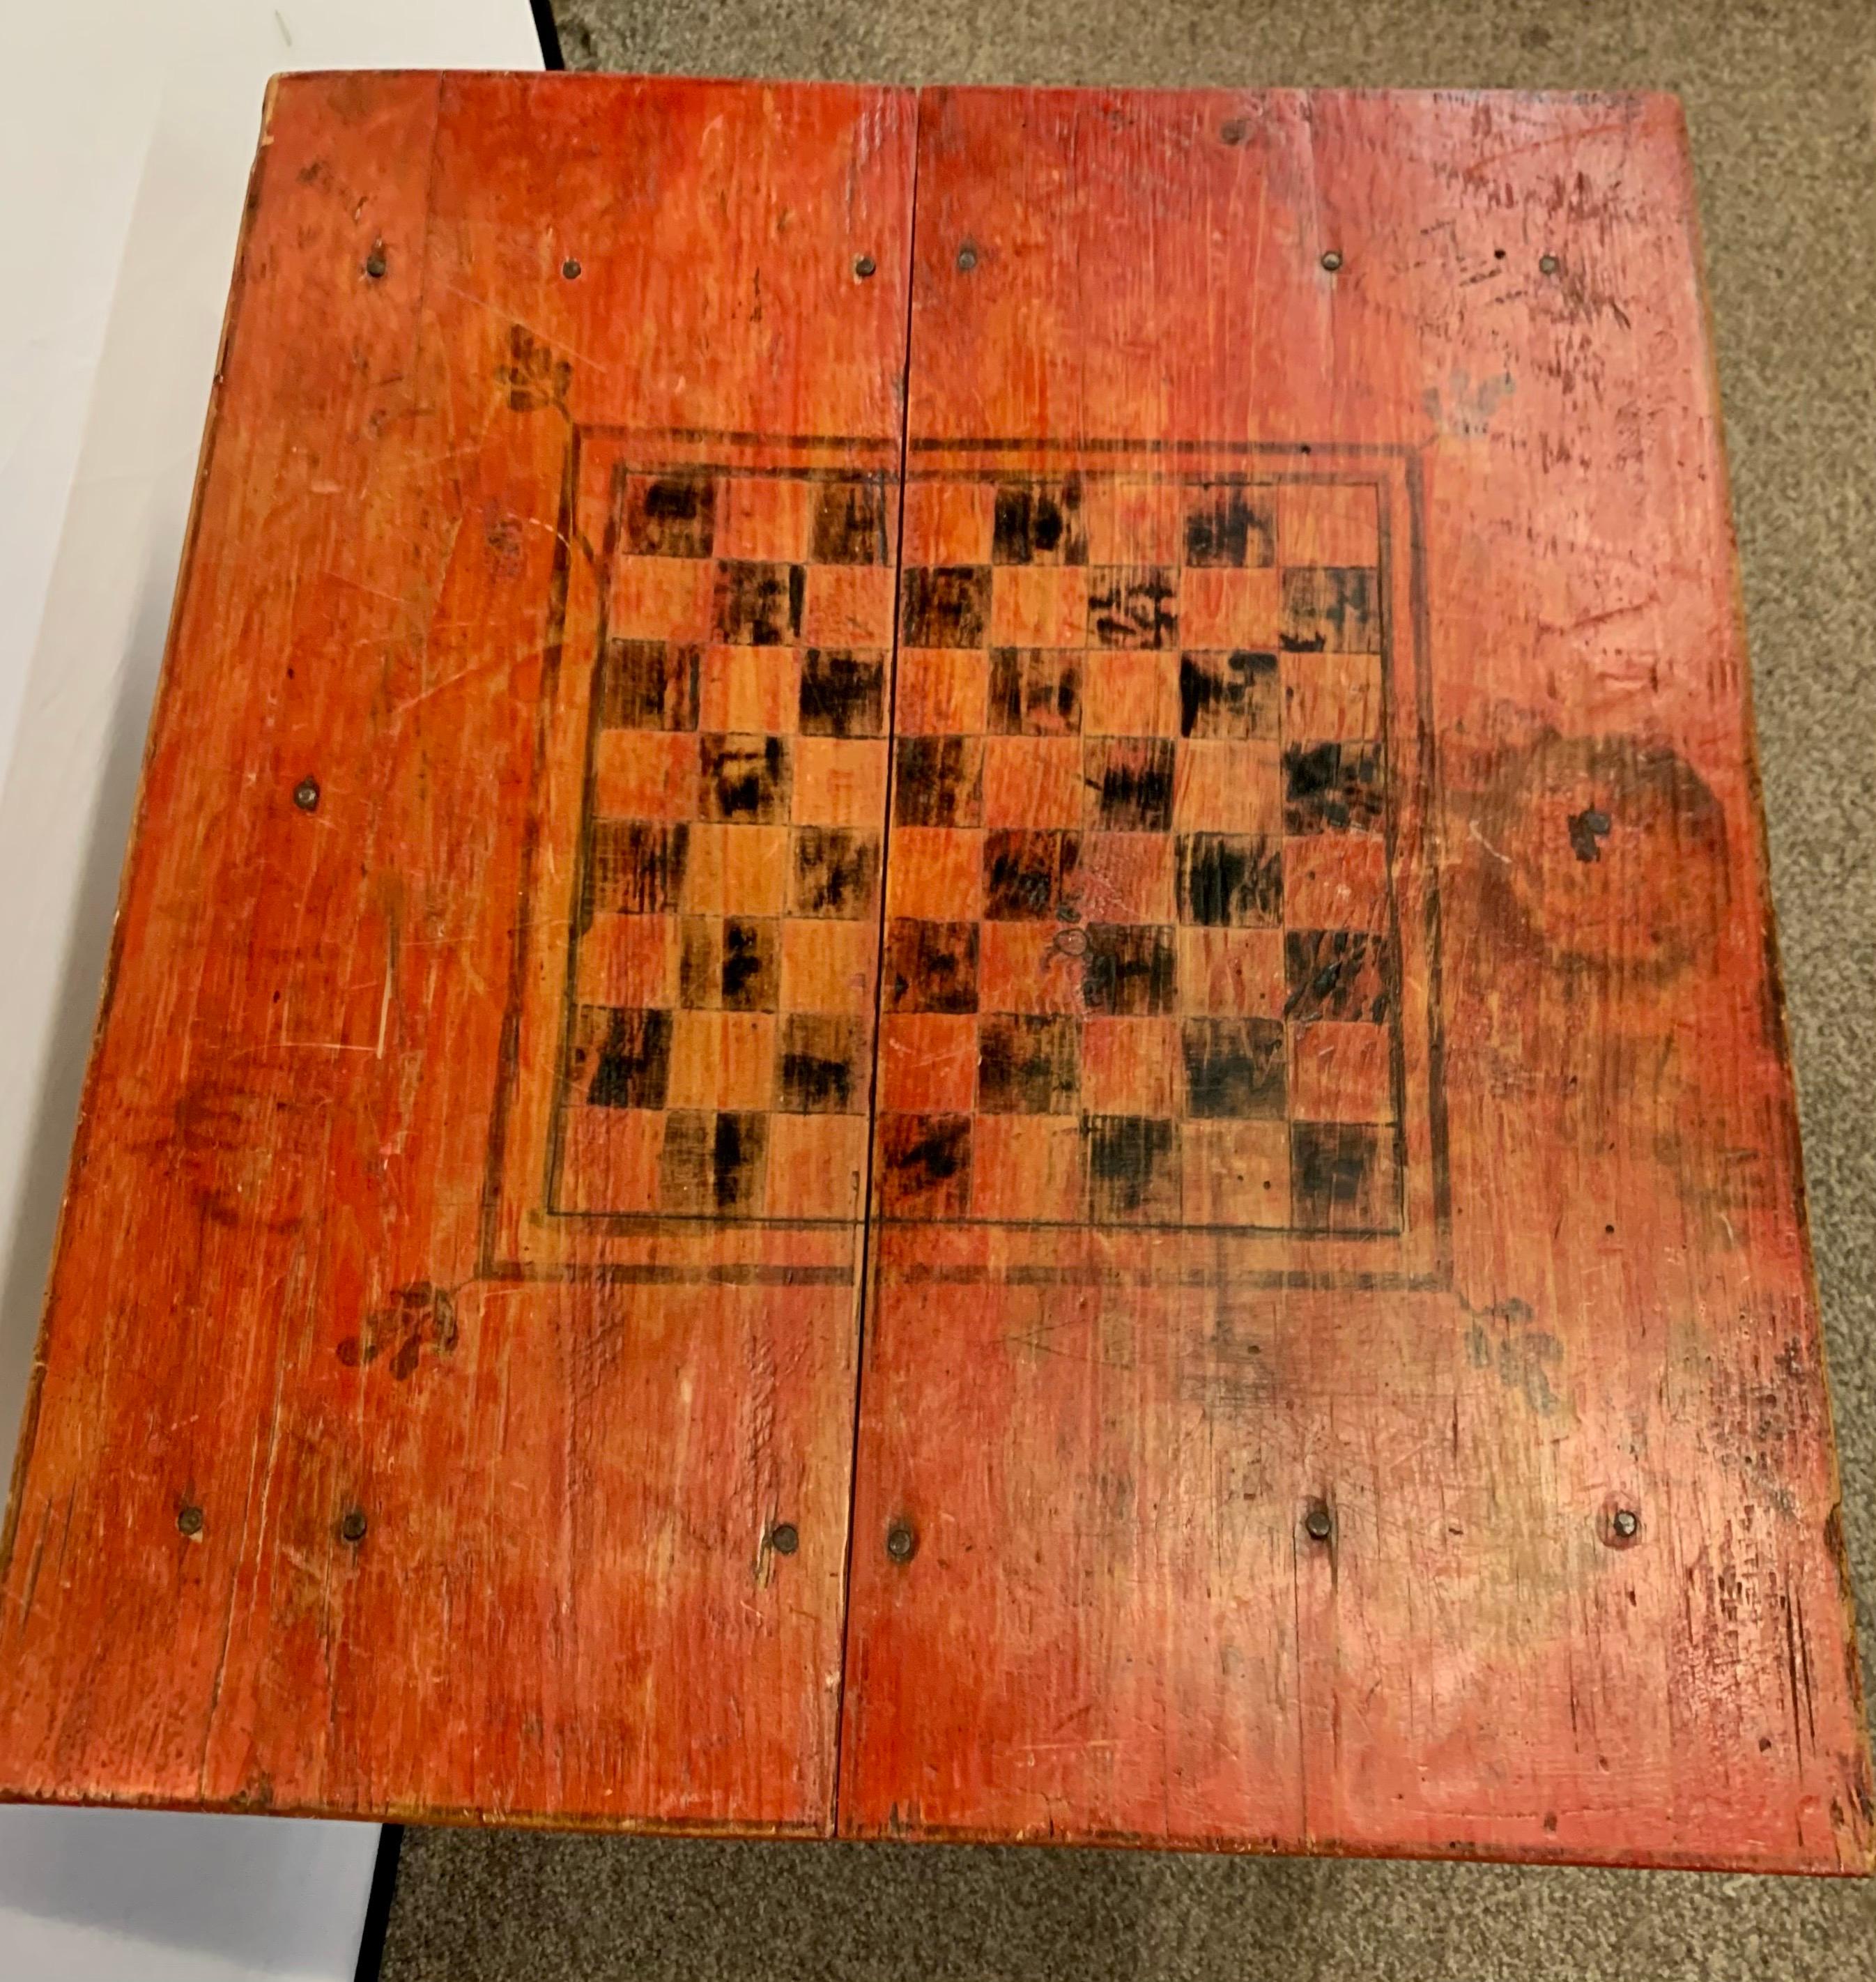 Handmade antique American primitive red game table with black checkerboard pattern. Item features a square top and solid wood construction. Great distressed patina only acquired through its age and use.